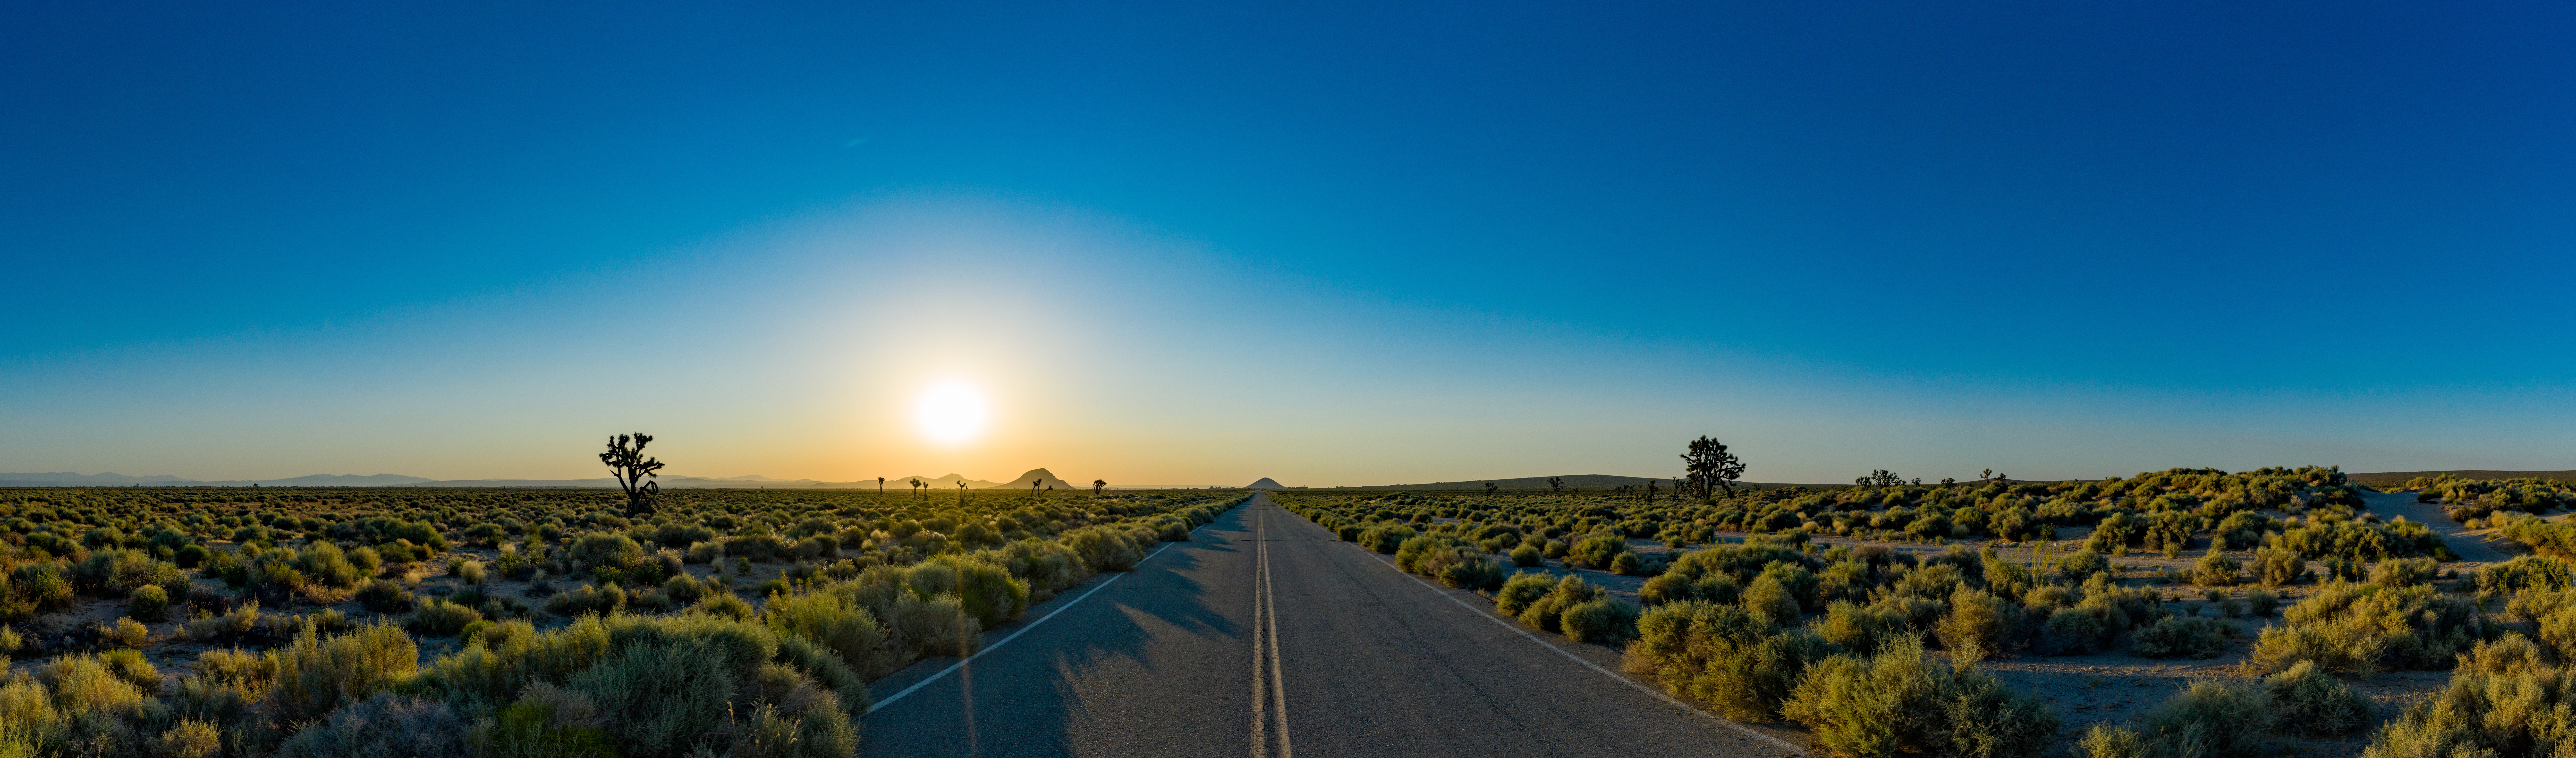 sunset over the long open road